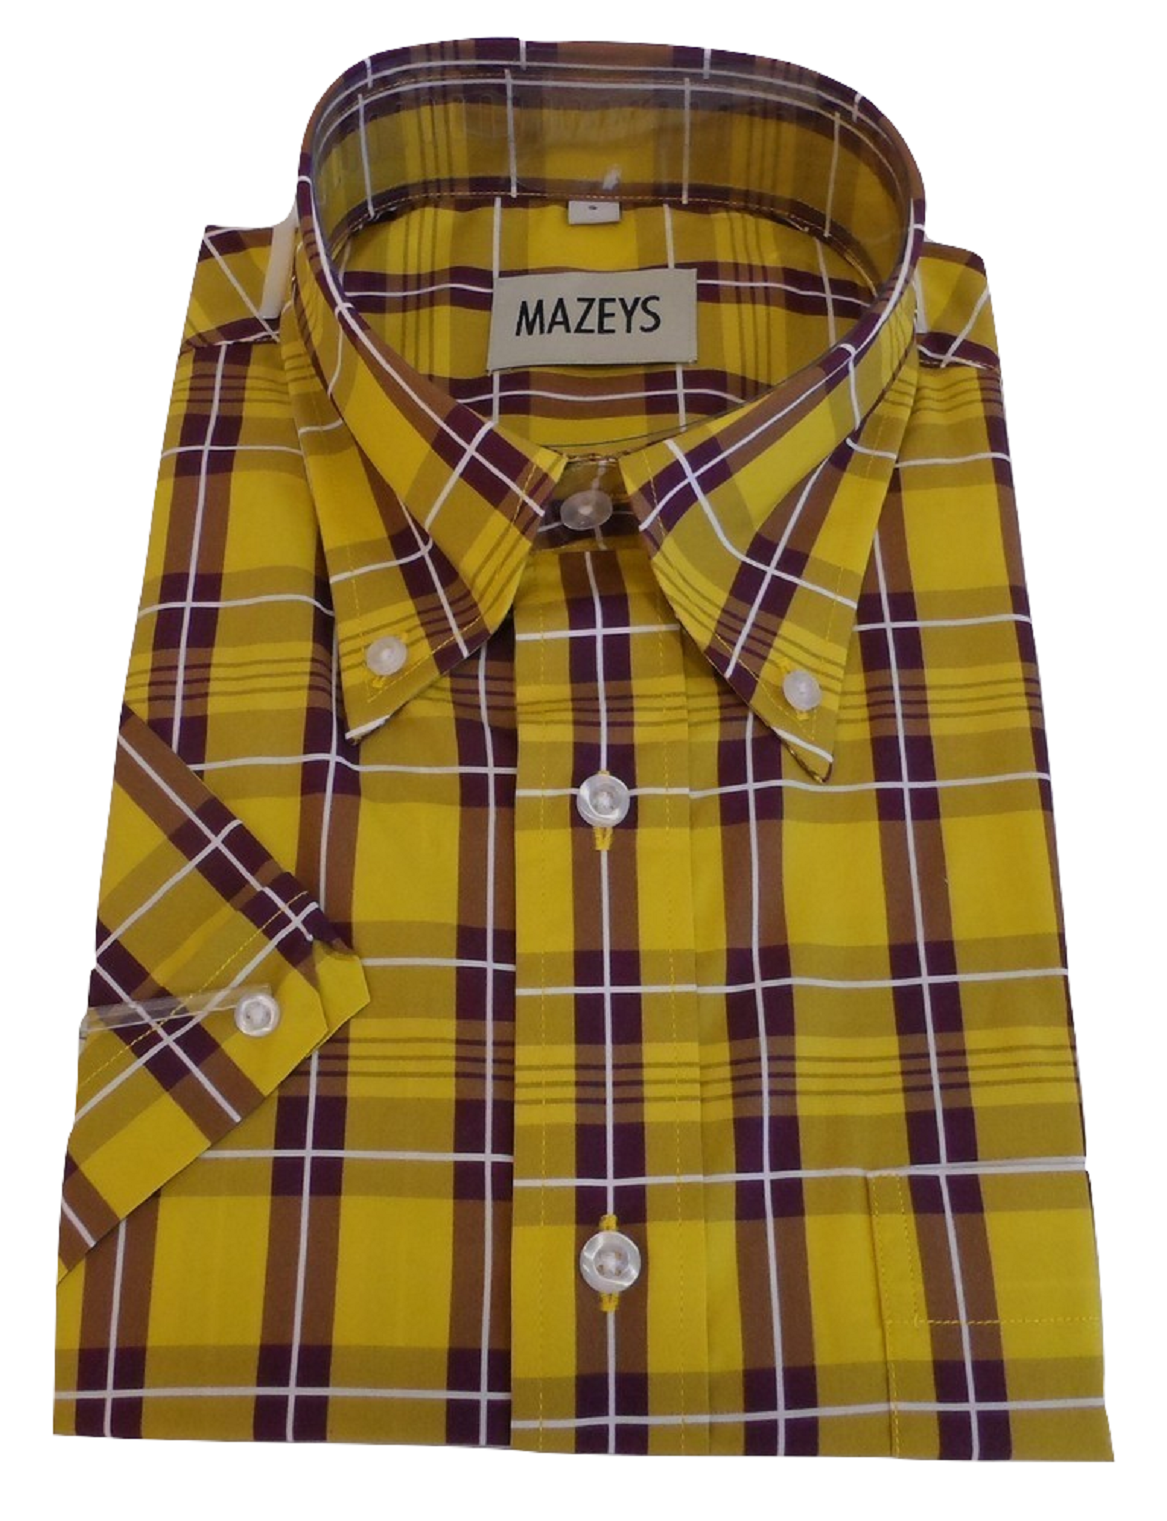 Mazeys Mens Yellow and Oxblood Checked 100% Cotton Short Sleeved Shirts